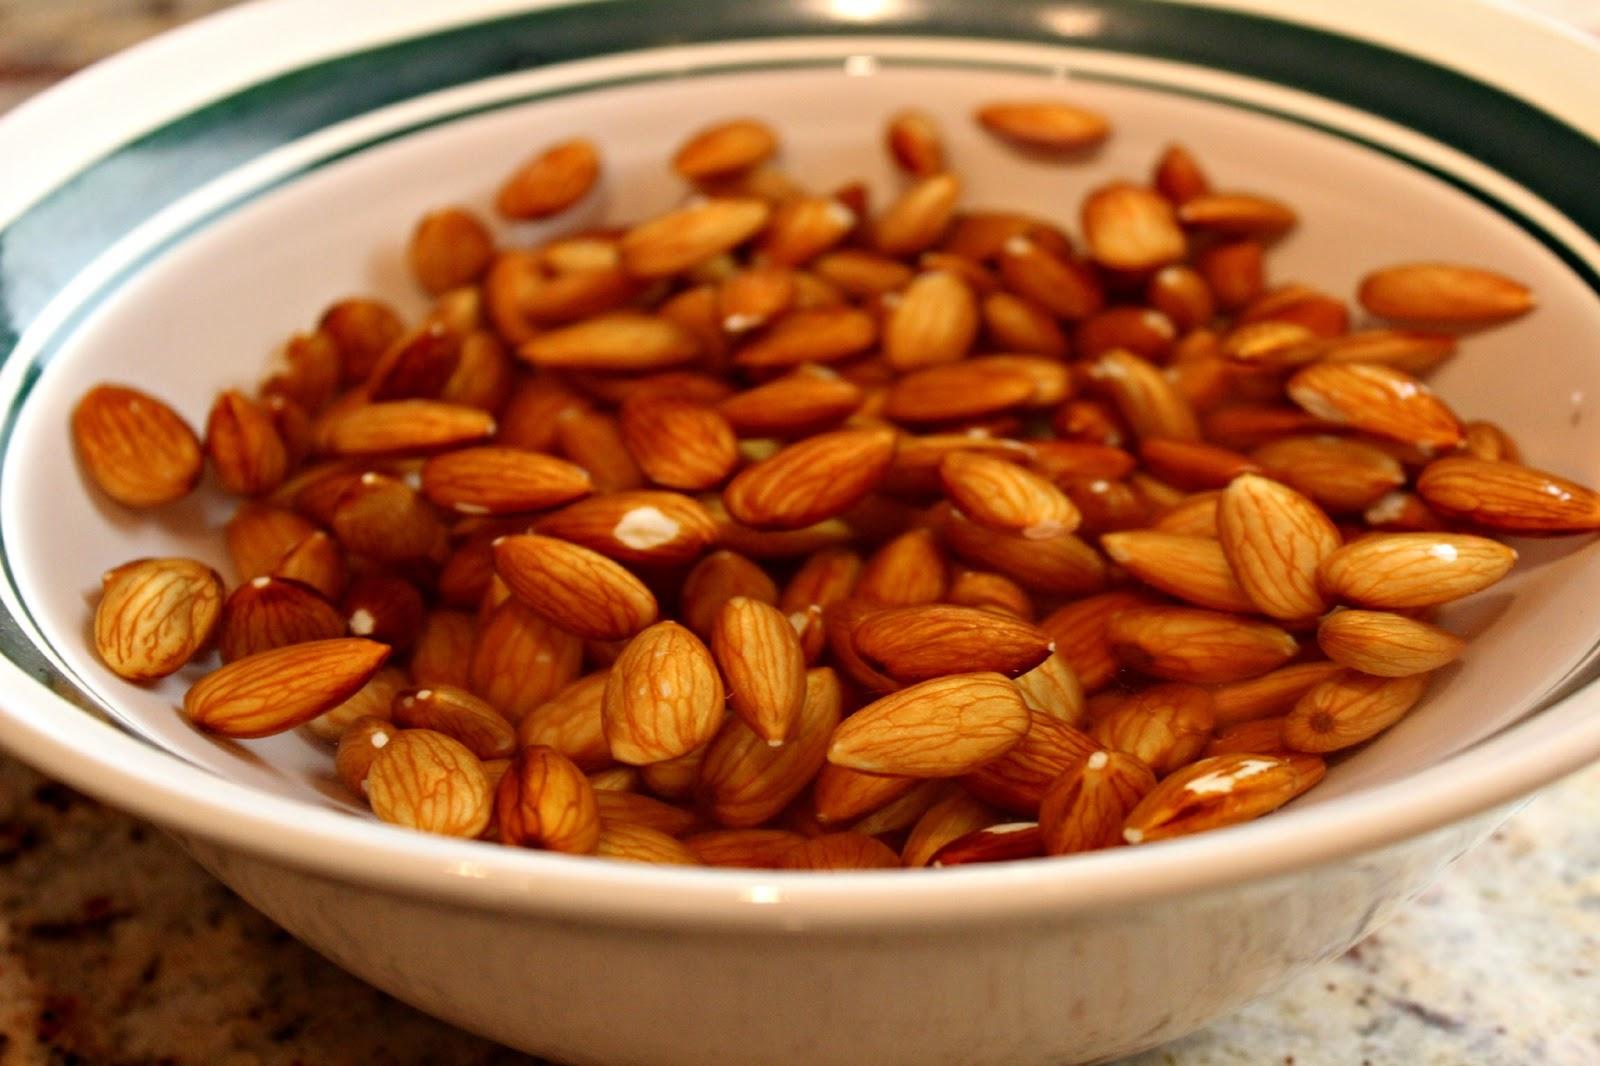 Almonds are a cheap and convenient snack to have throughout the day for better health and more energy. Faduma Muhidin, City Times